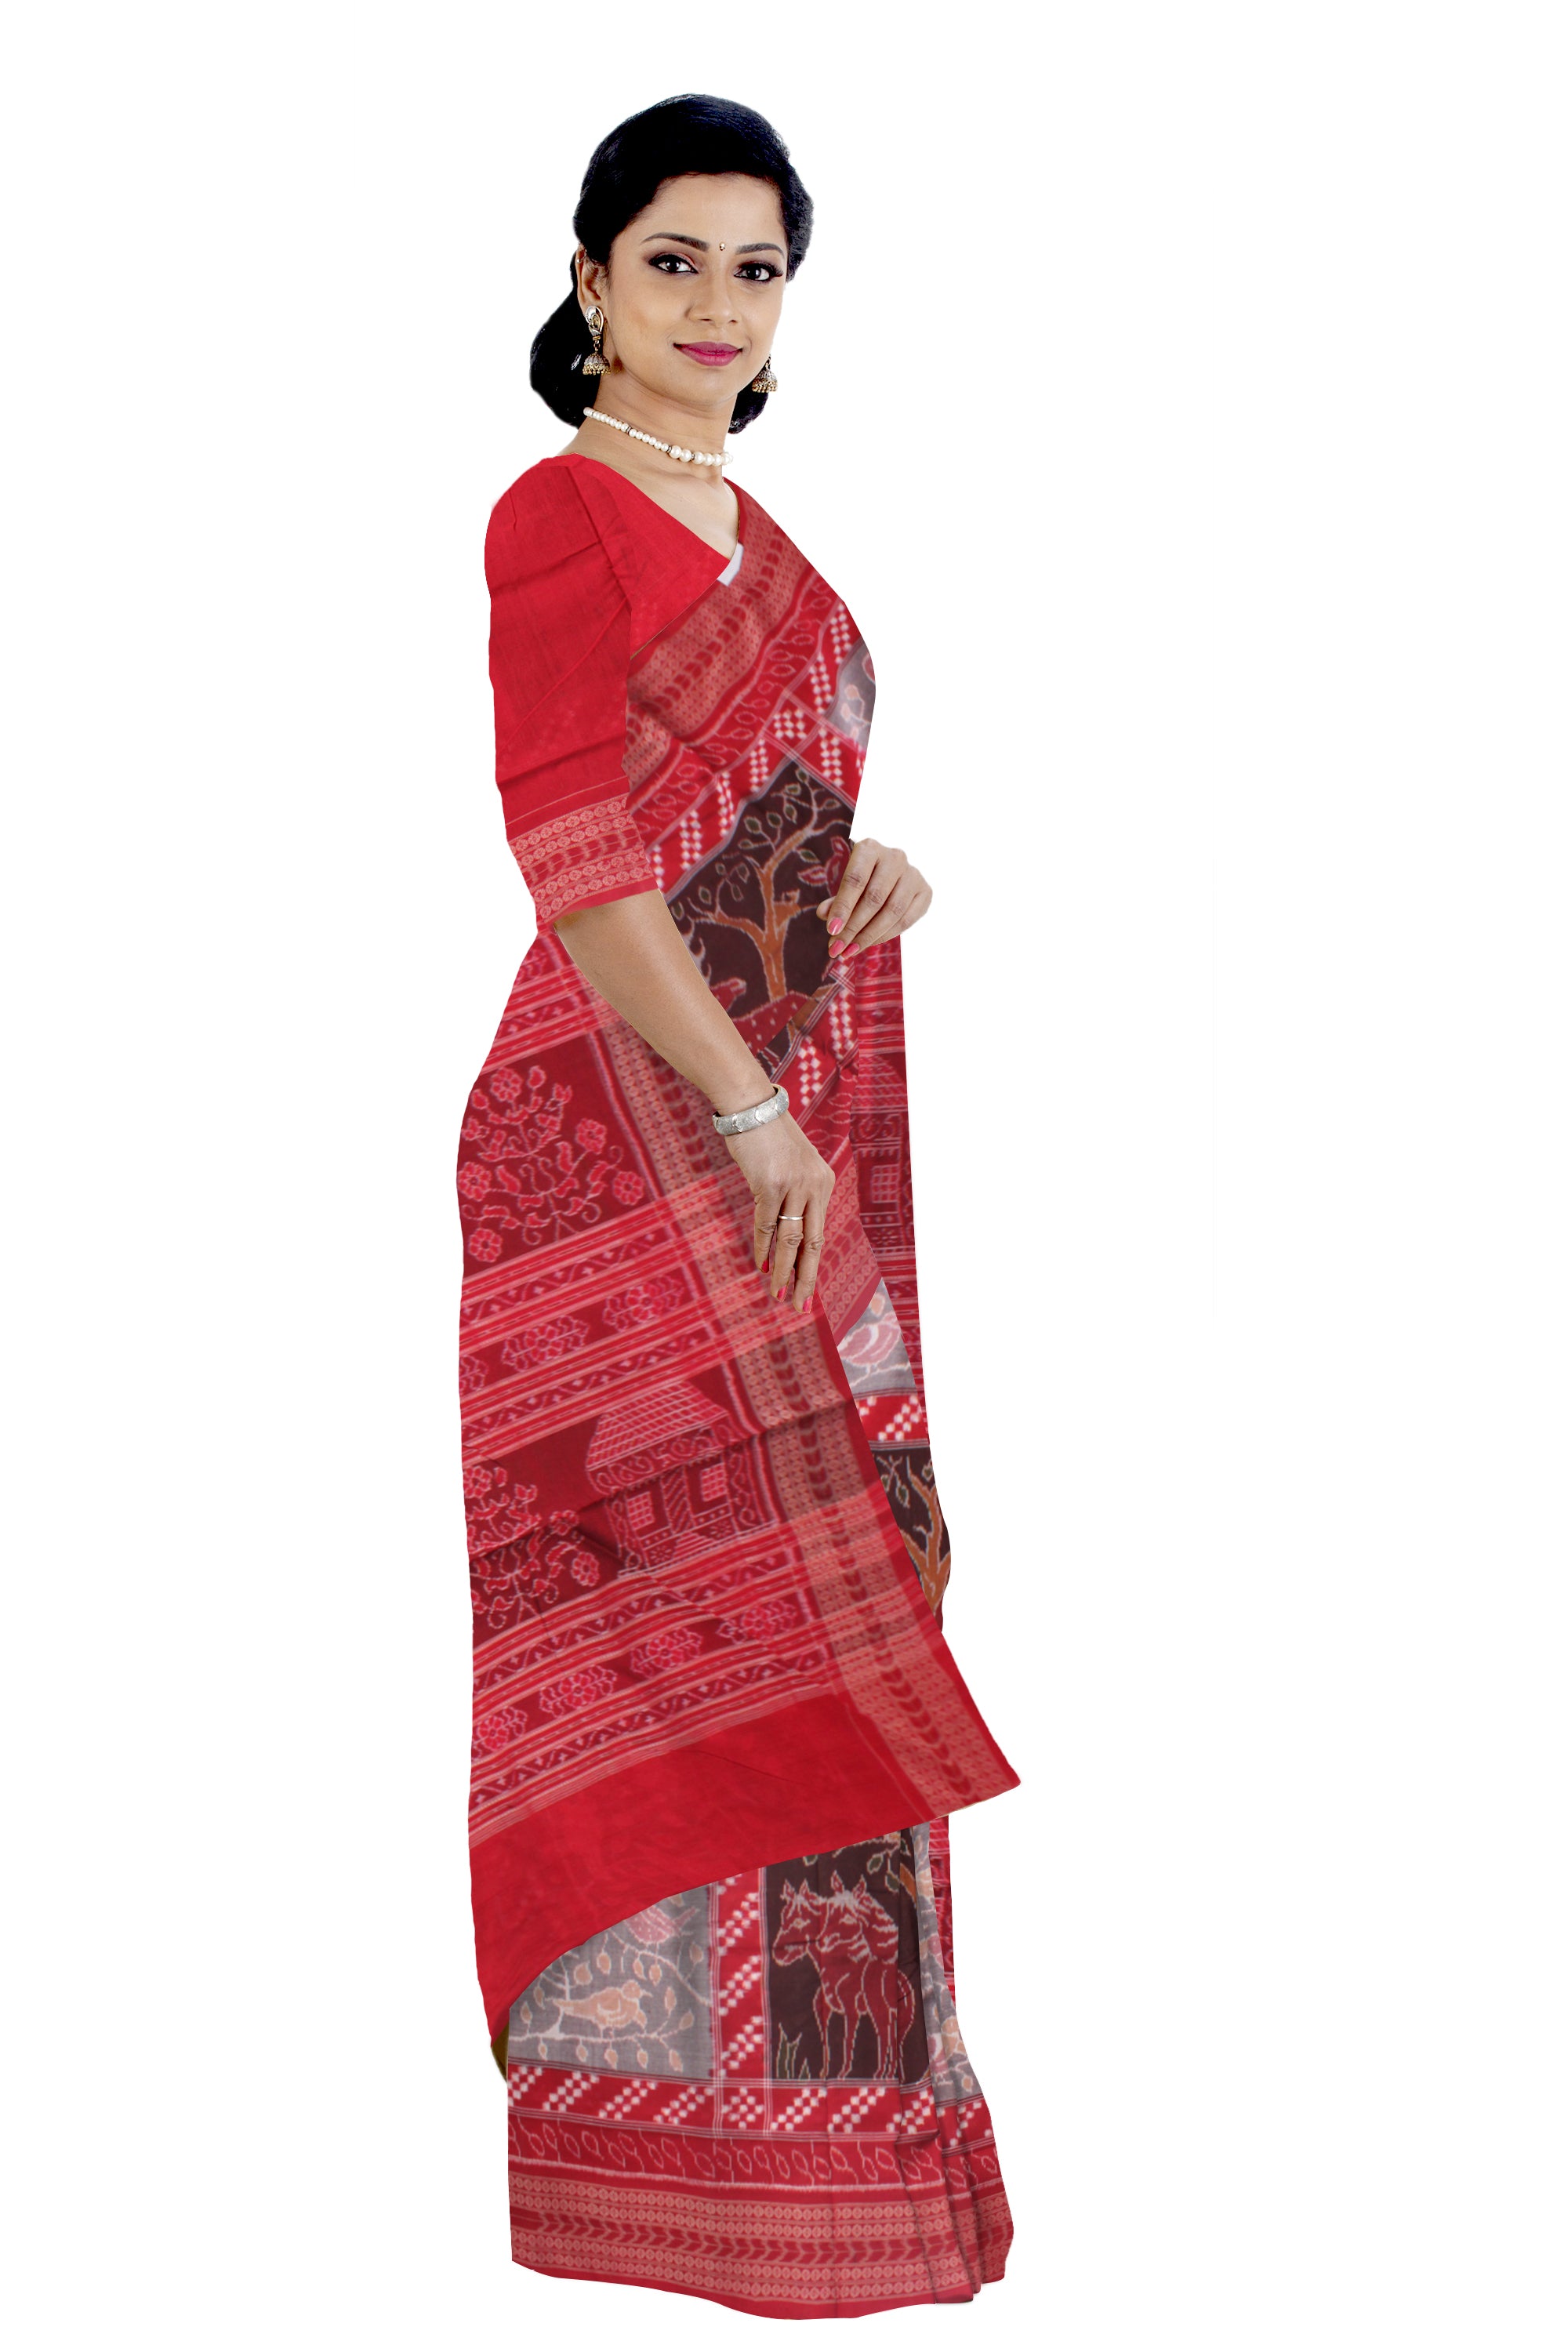 TRADITIONAL FOREST ANIMAL PATTERN  SILVER, COFFEE AND RED COLOR PURE COTTON SAREE,WITH MATCHING BLOUSE PIECE. - Koshali Arts & Crafts Enterprise